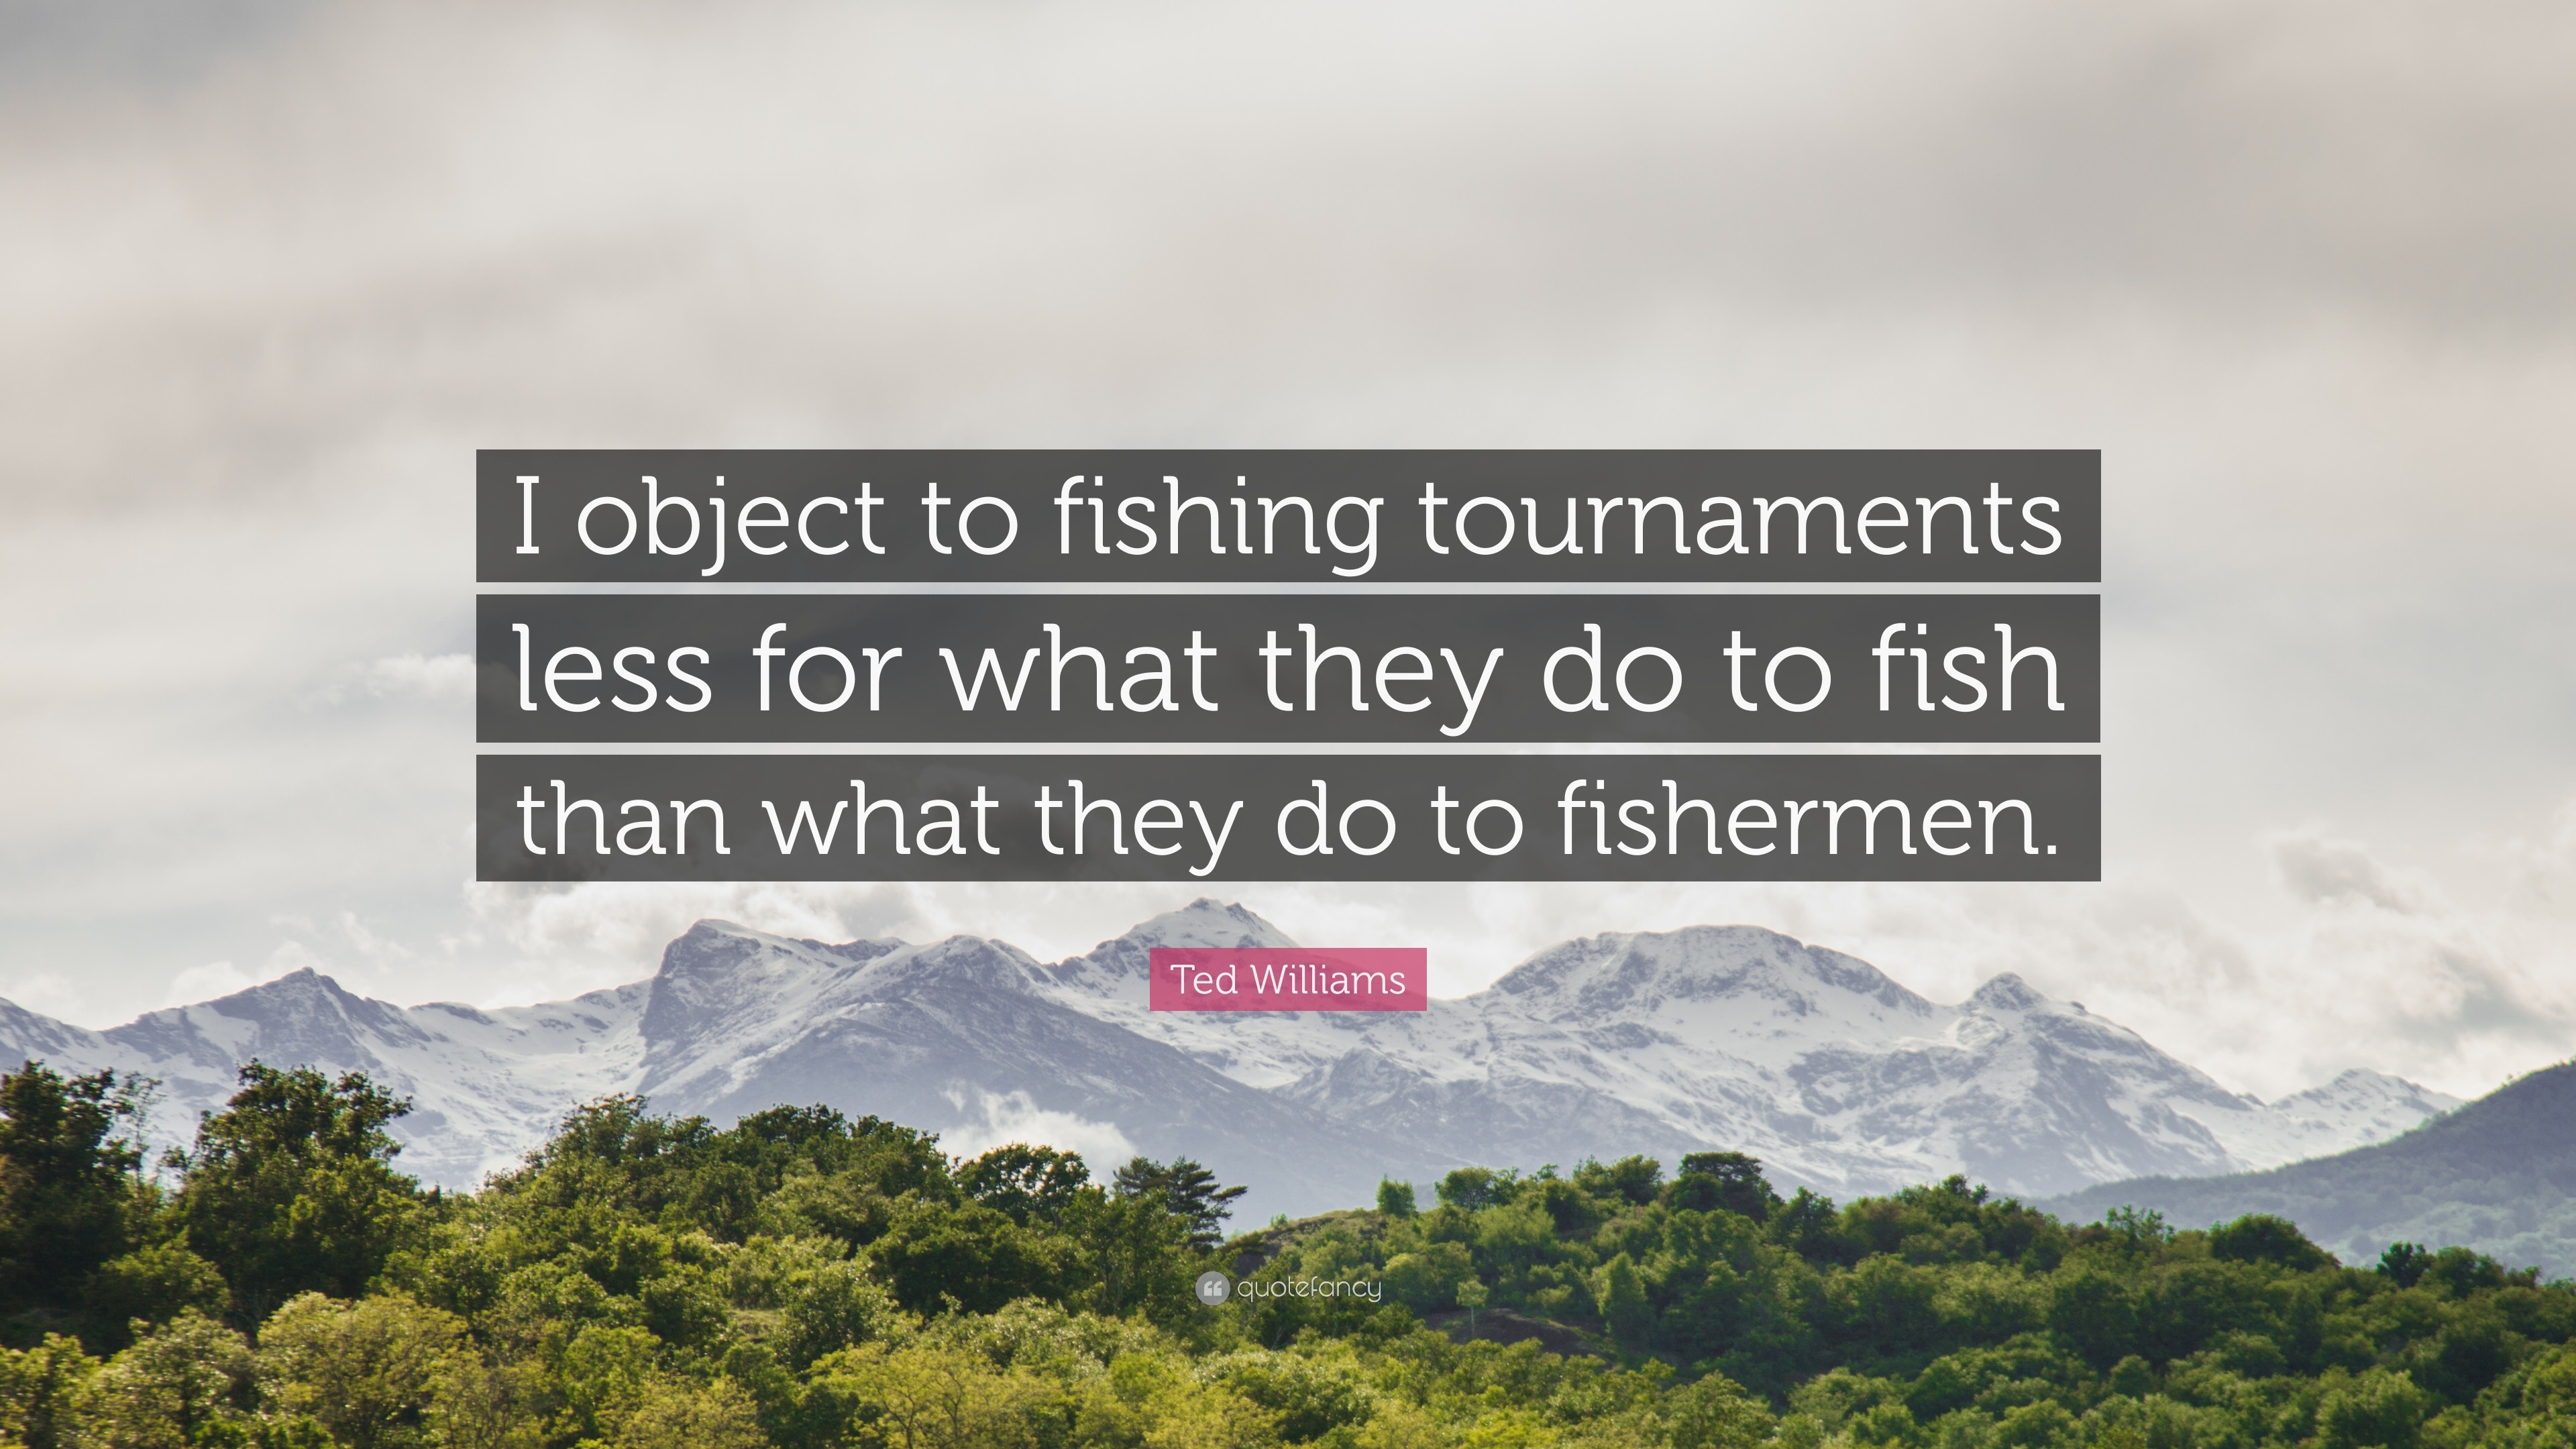 Ted Williams Quote: “I object to fishing tournaments less for what they do  to fish than